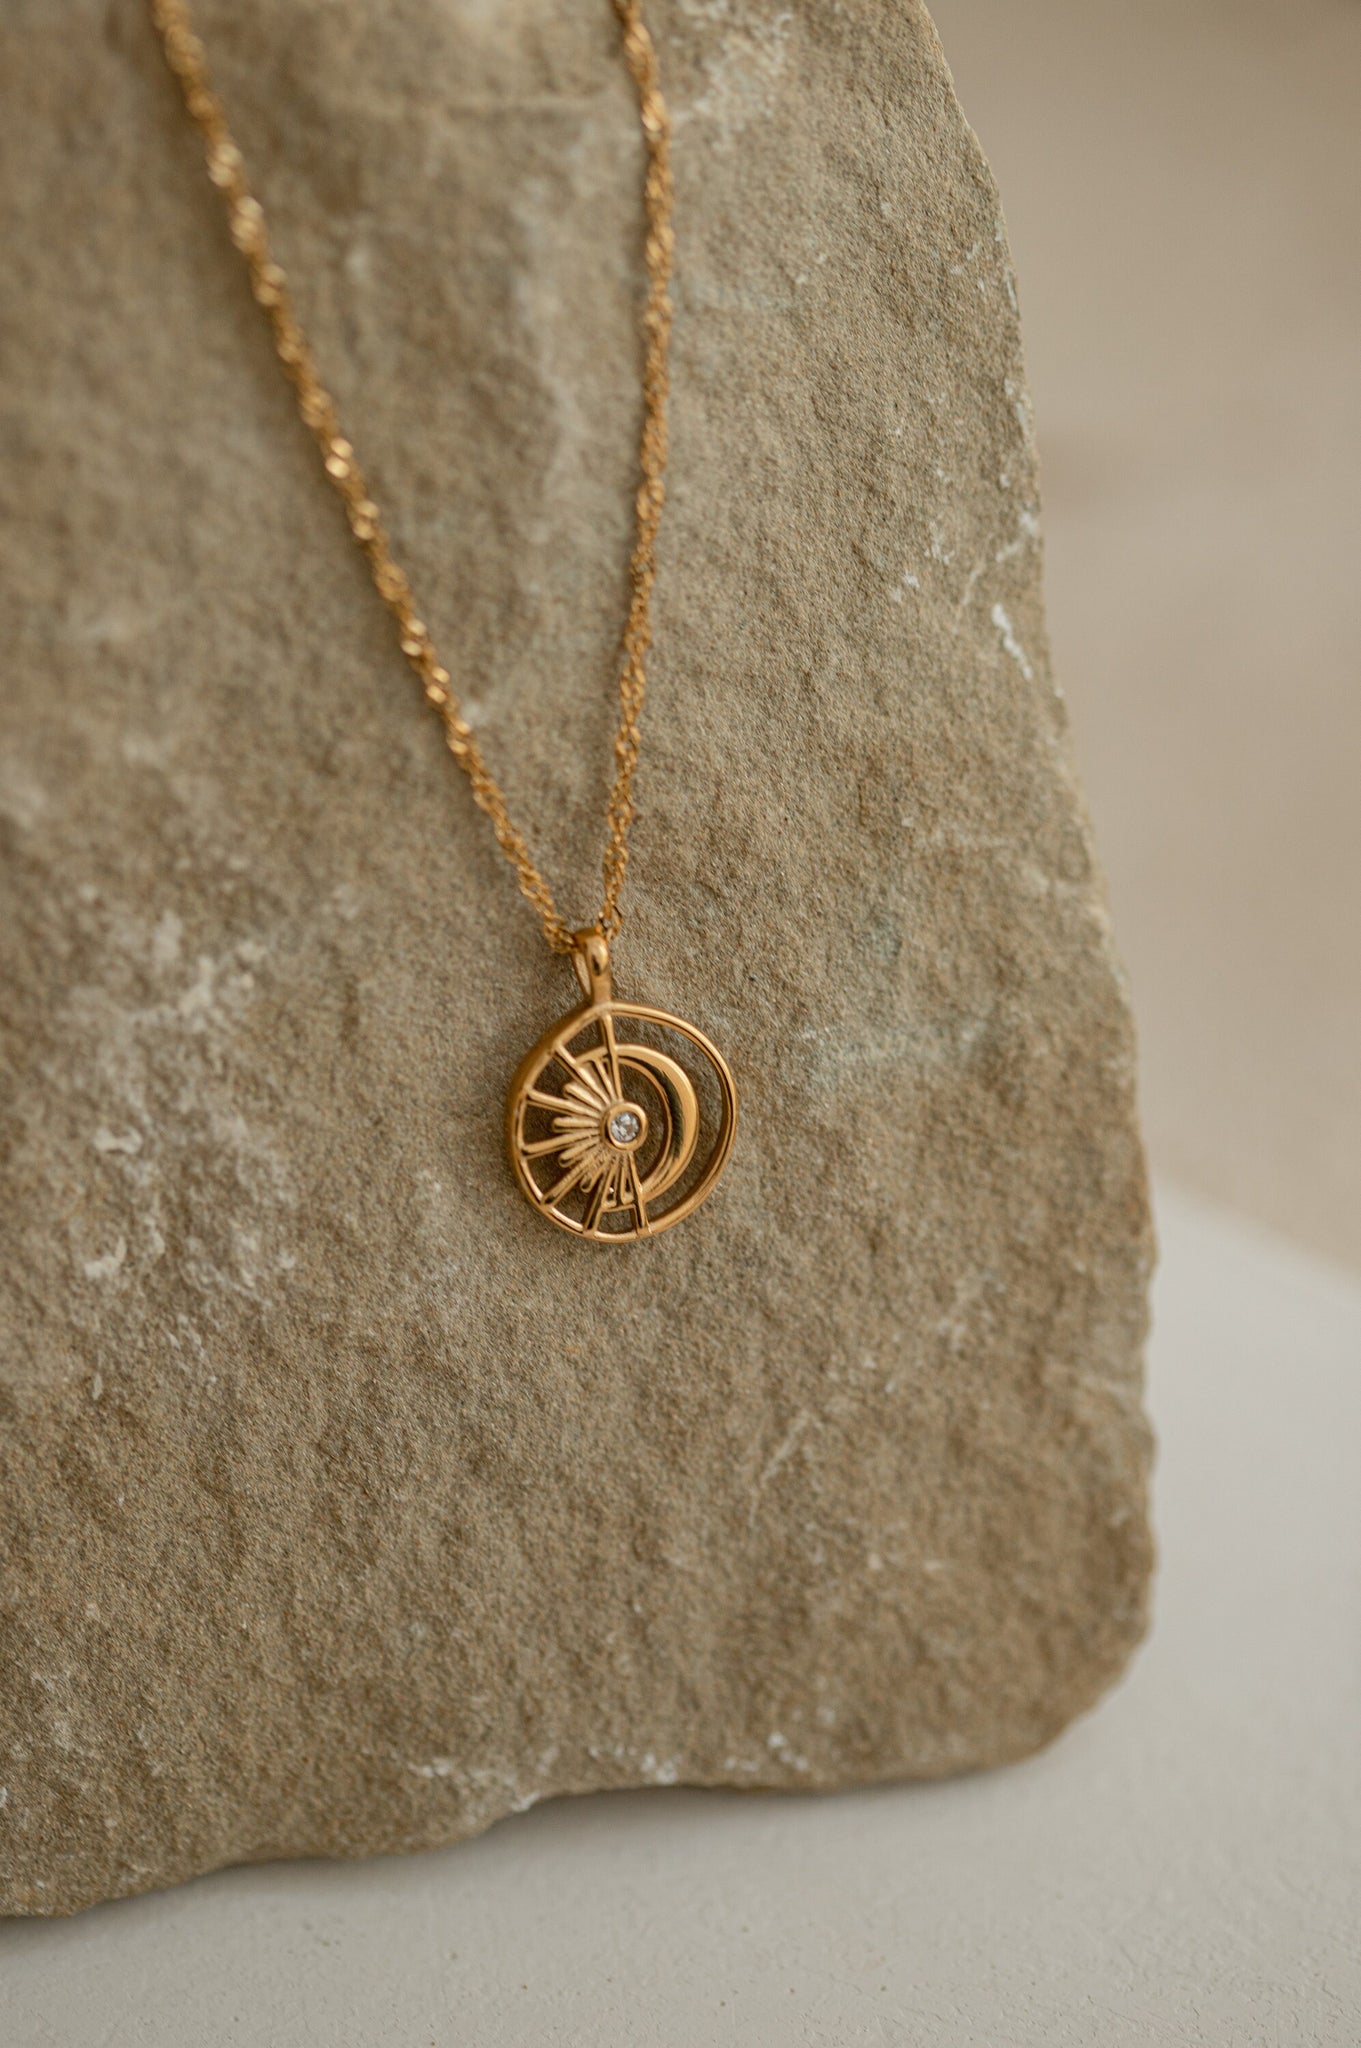 Sun And Moon Necklace, 18K Gold, Gift For Mothers Day, Necklace With CZ Stone, Gift For Her, Celestial Cute Necklace, Unique Moon Jewelry